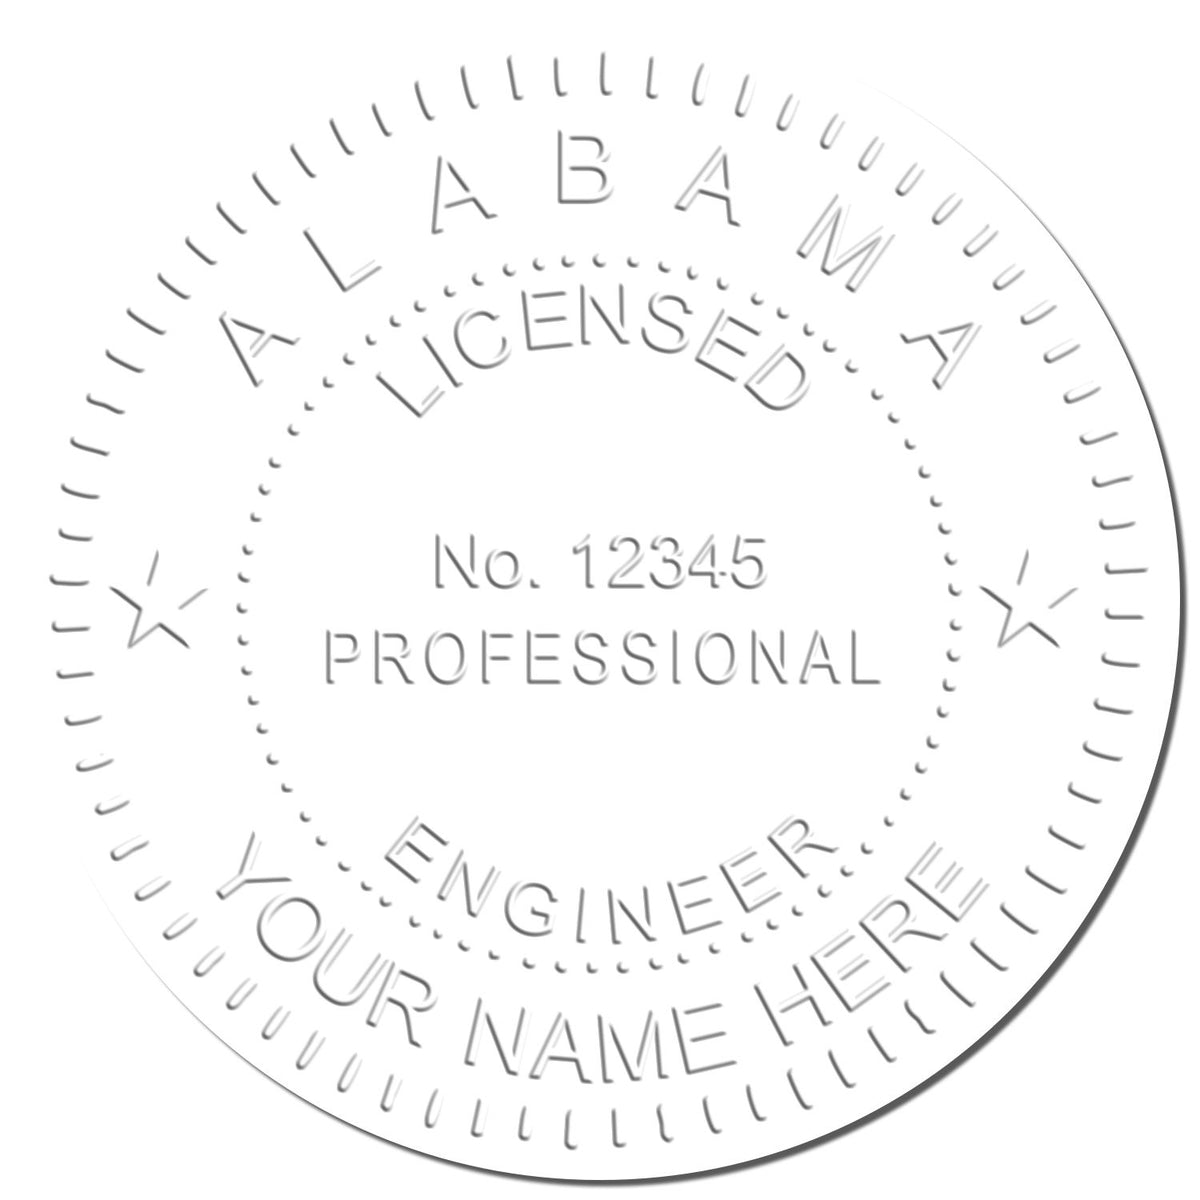 This paper is stamped with a sample imprint of the State of Alabama Extended Long Reach Engineer Seal, signifying its quality and reliability.